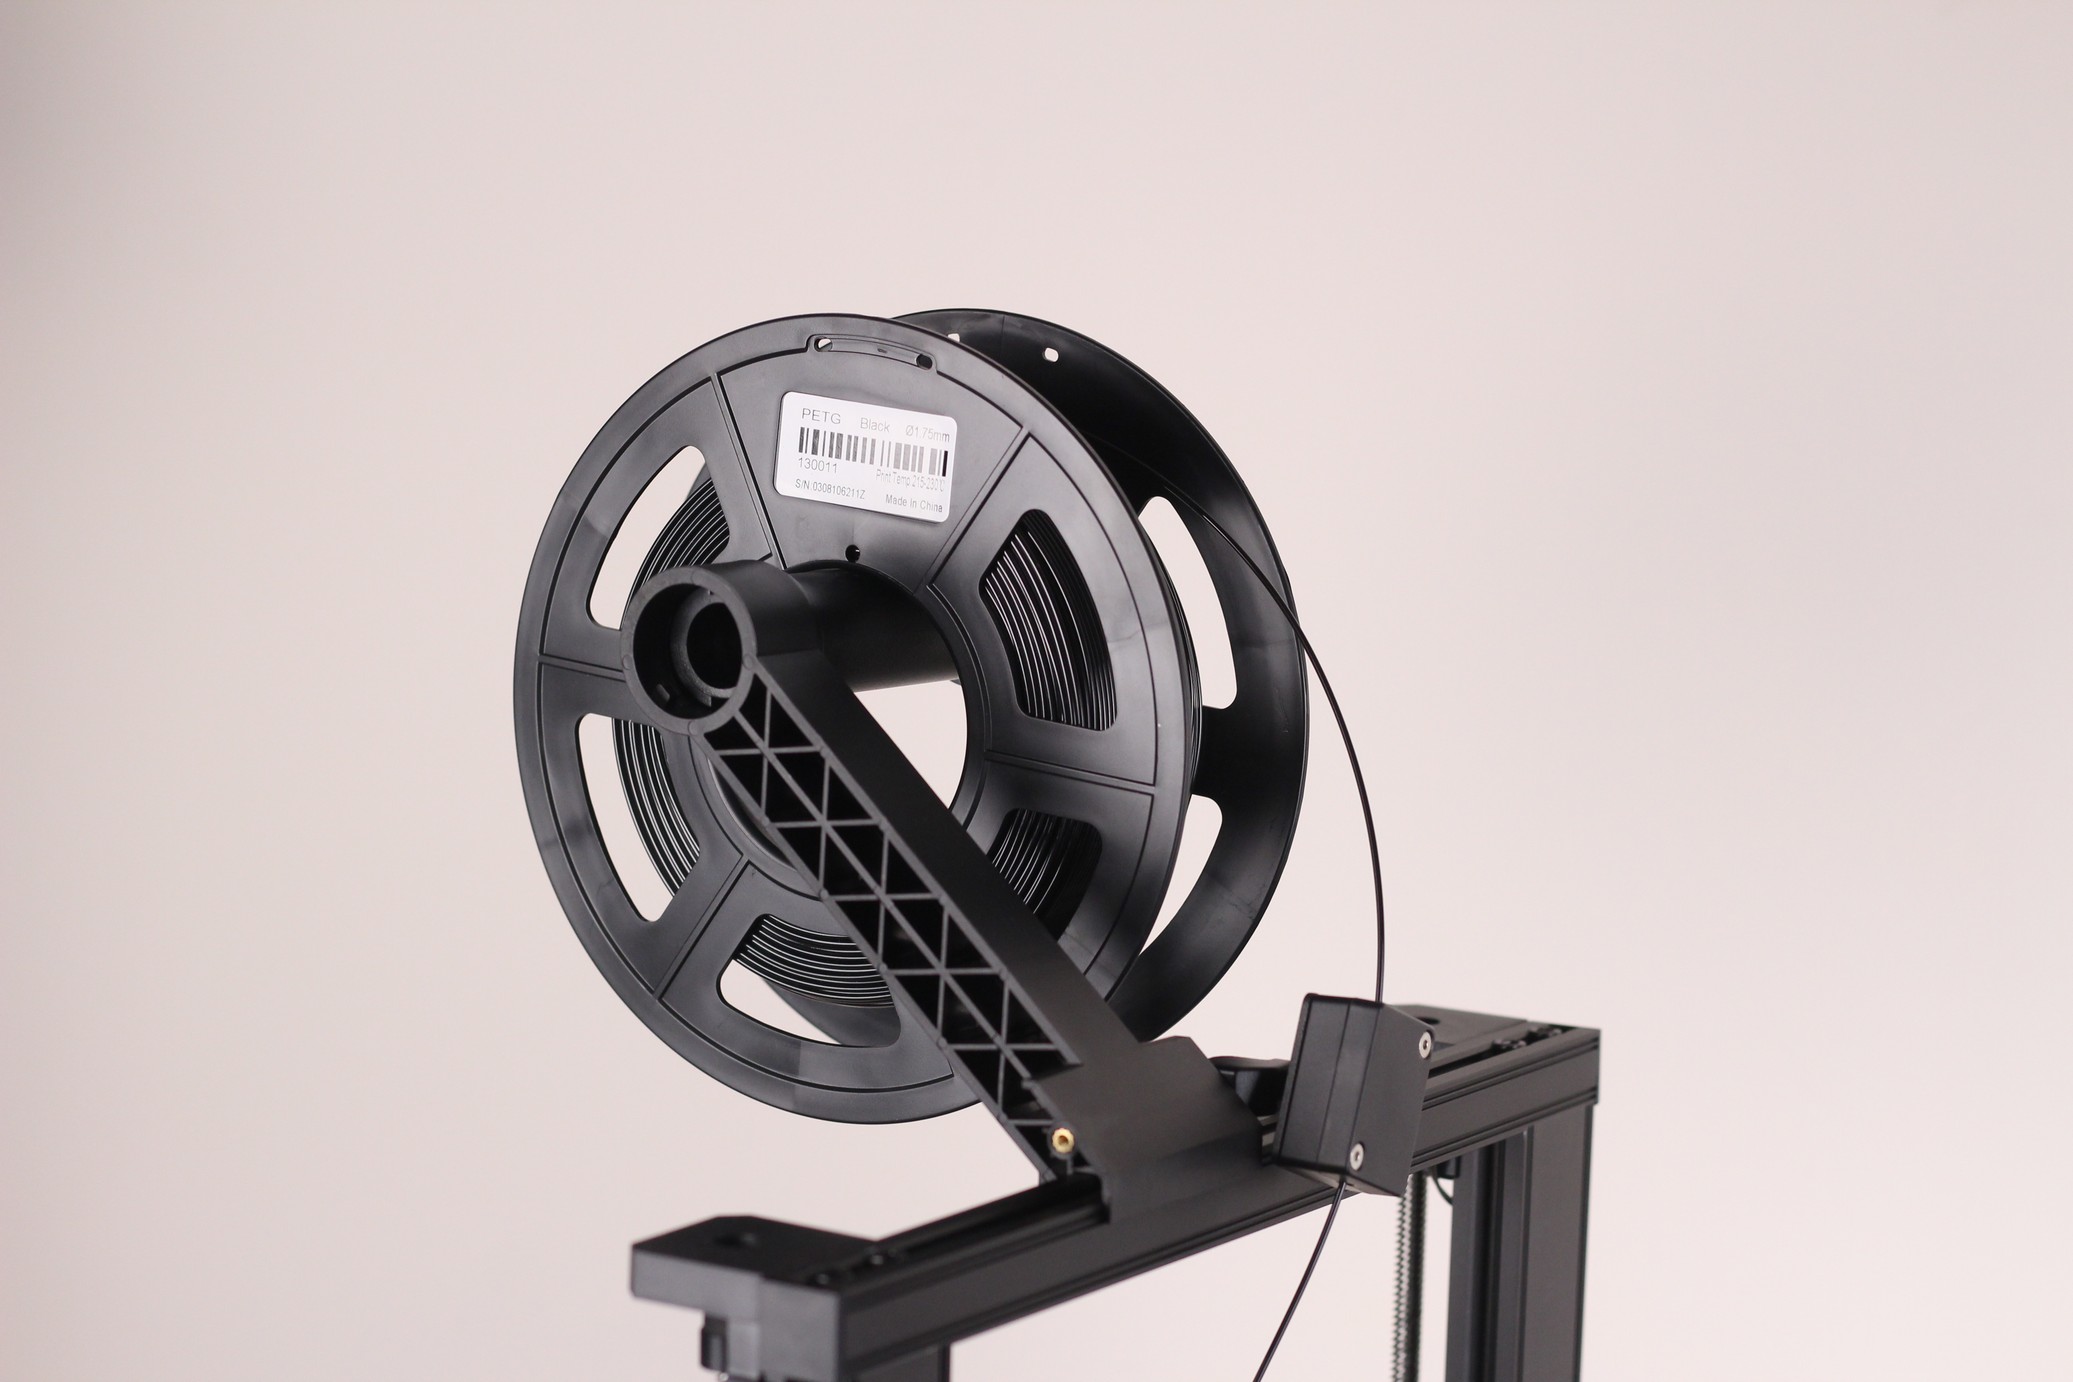 Spool Holder Ender 3 S1 | Creality Ender 3 S1 Review: Almost Perfect